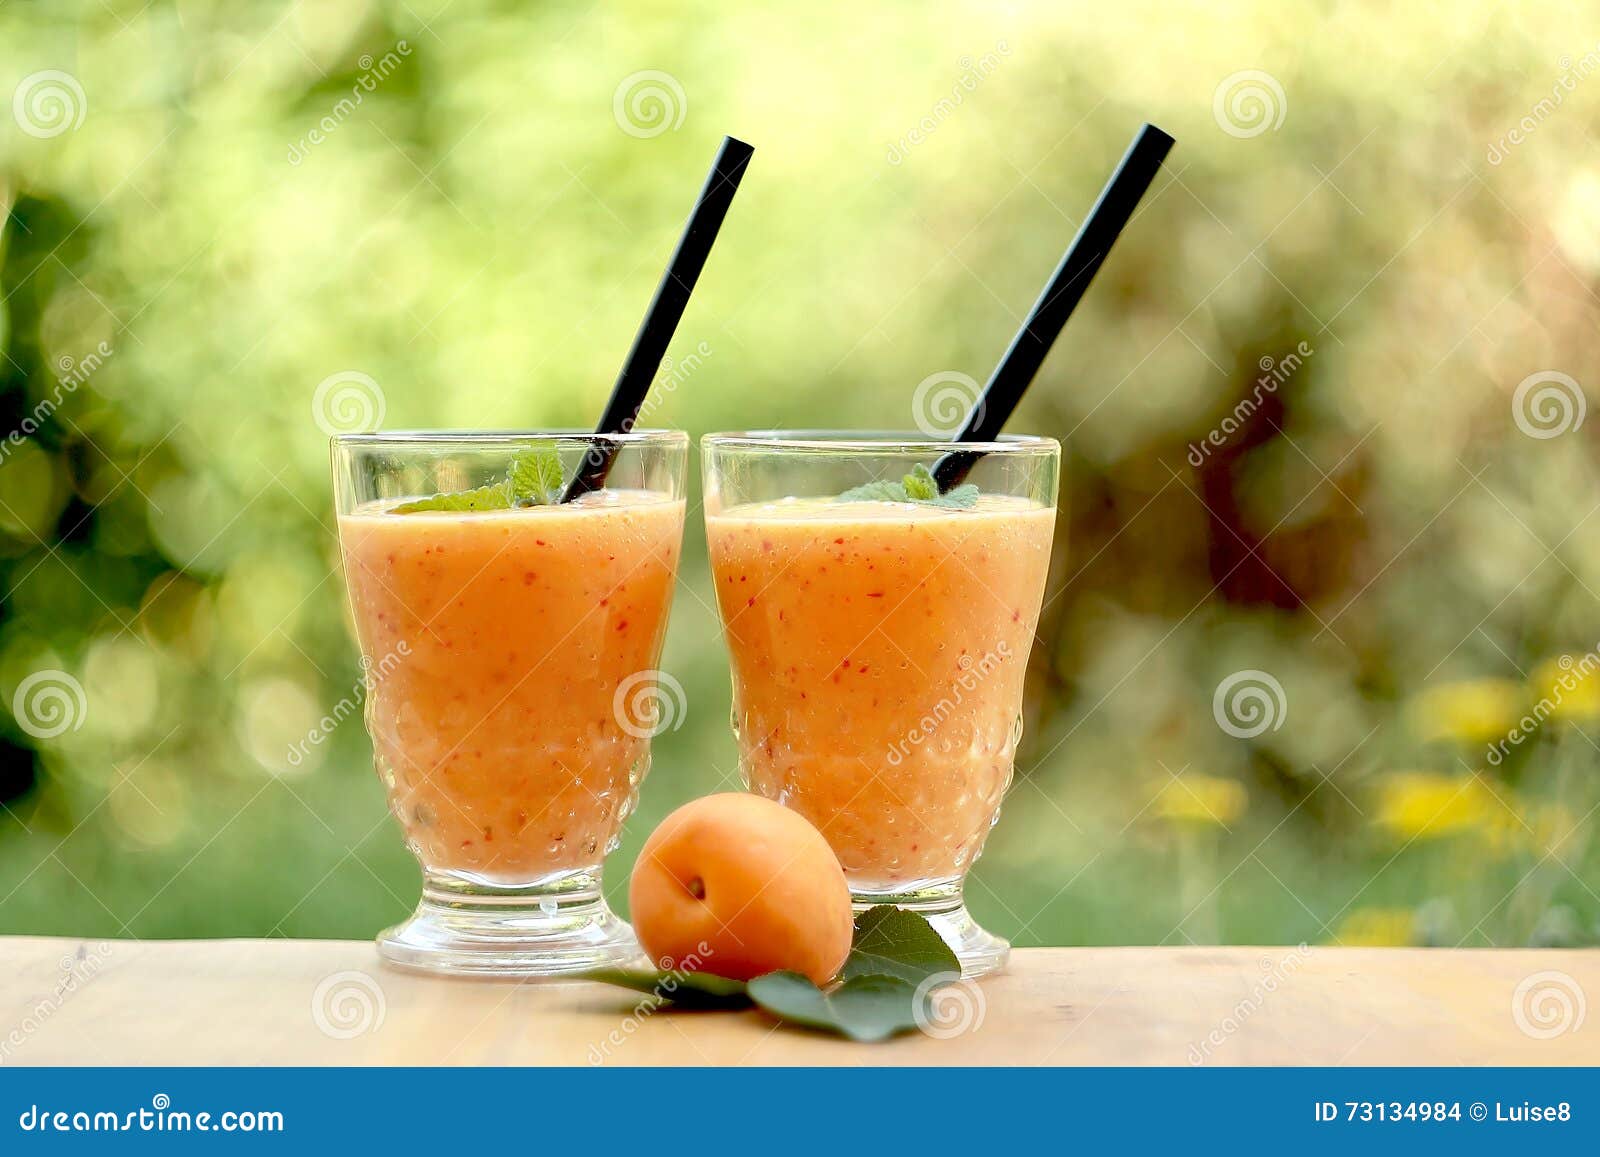 Apricot smoothie stock photo. Image of drink, leaf, ripe - 73134984